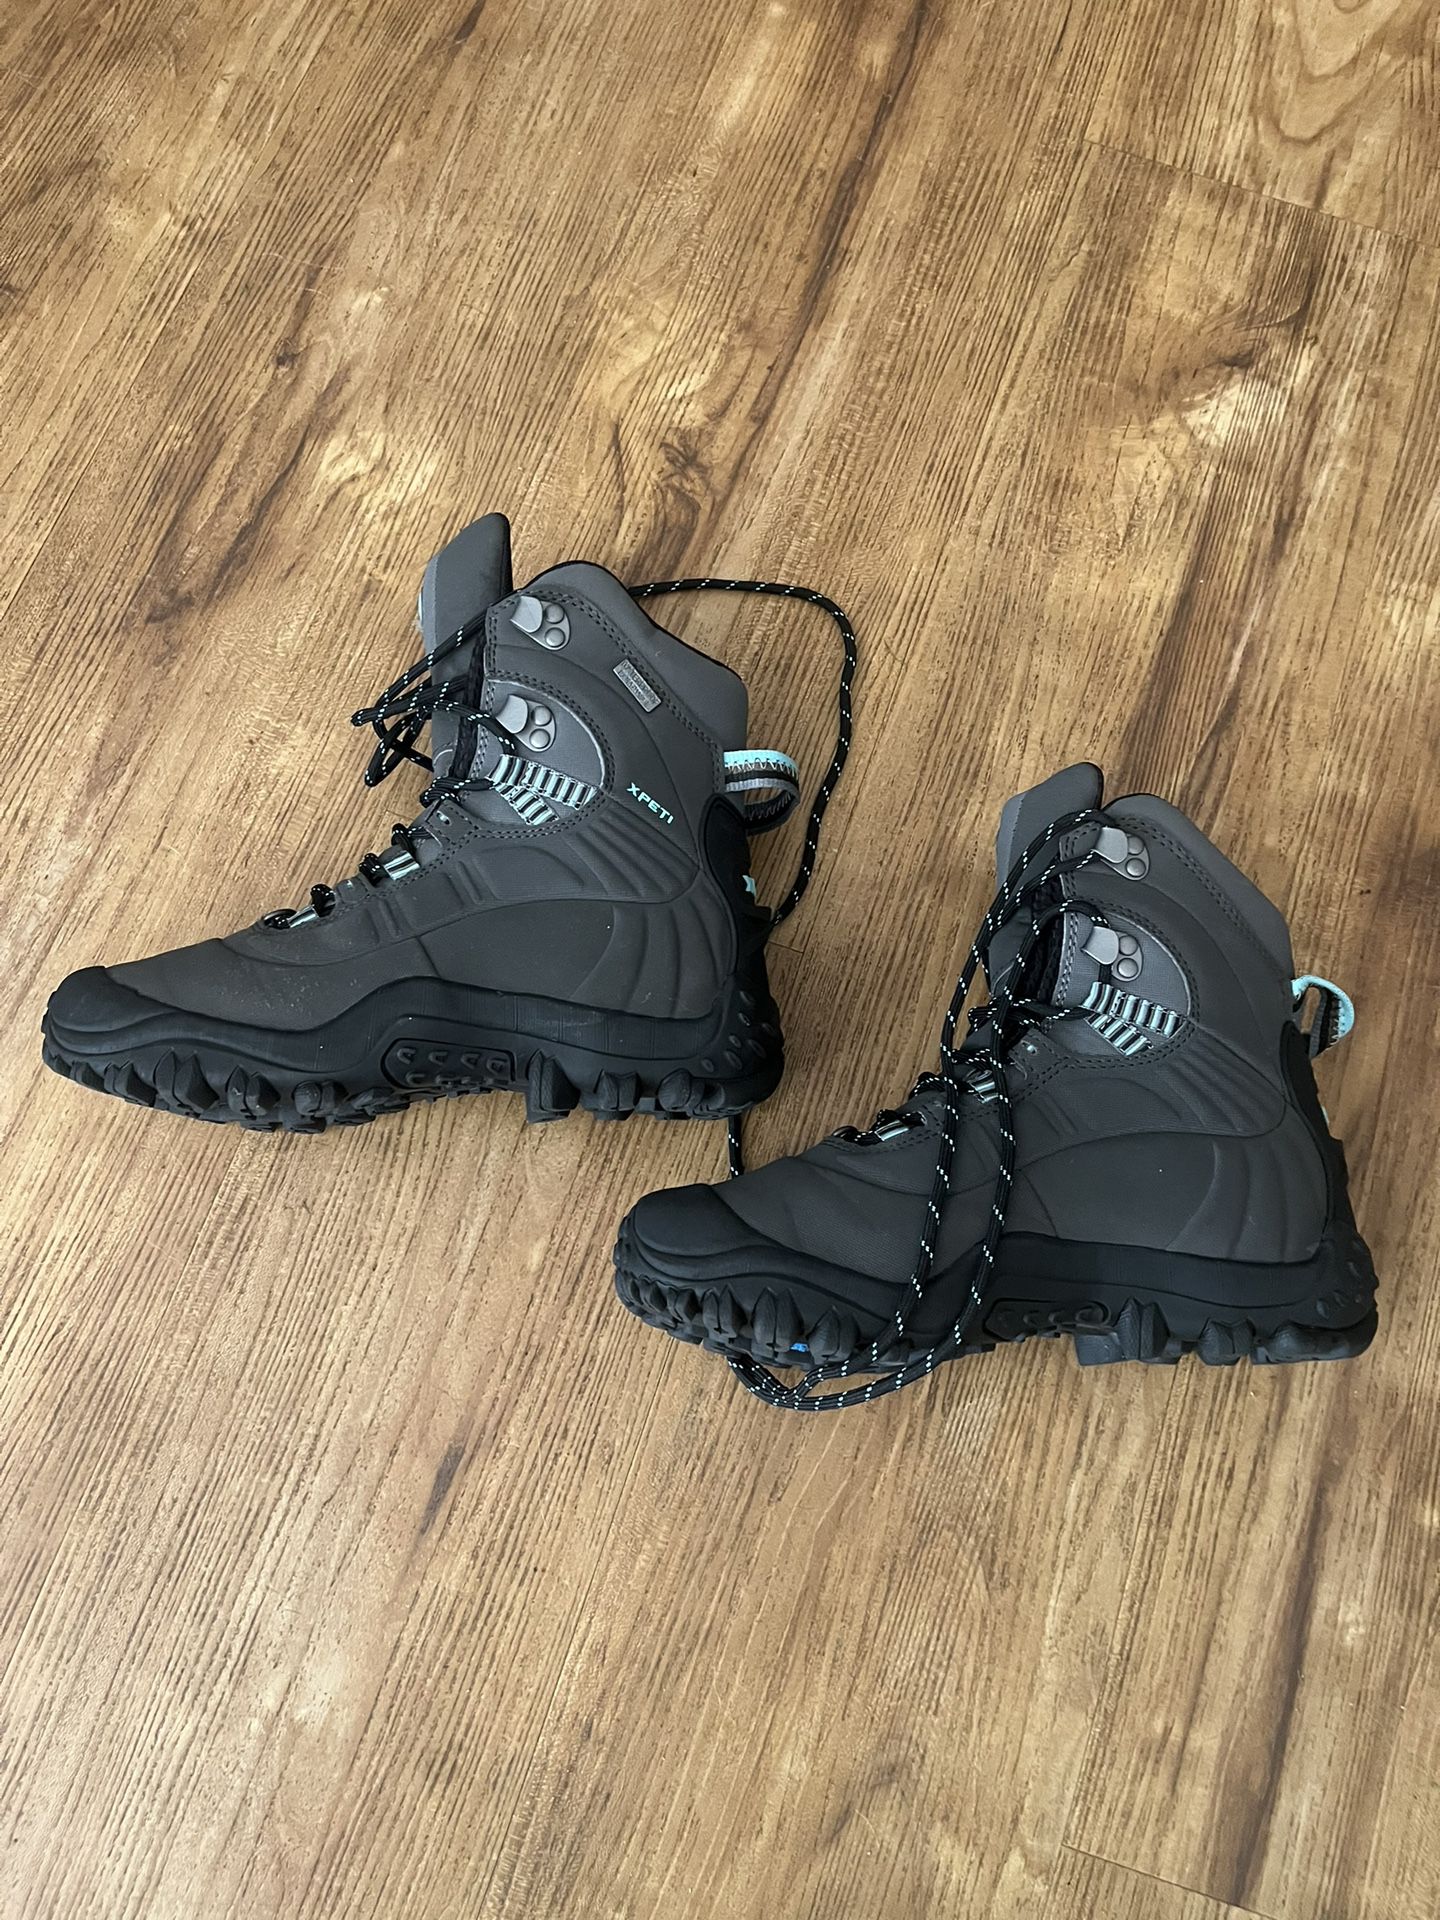 BRAND NEW Hiking Boots Women Size 7